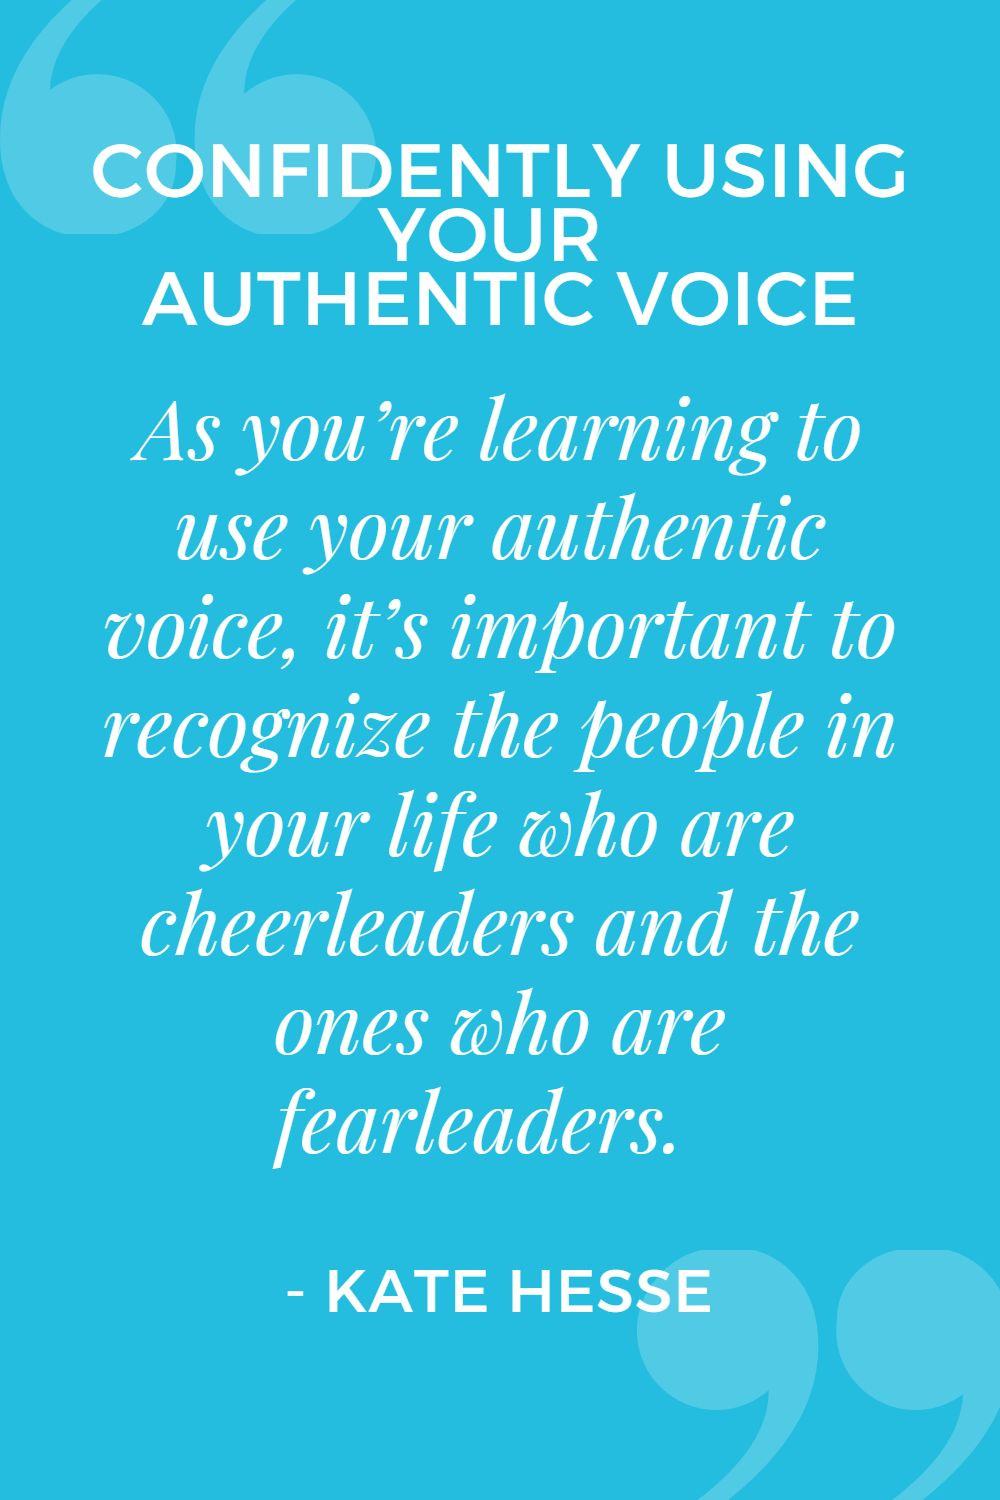 As you're learning to use your authentic voice, it's important to recognize the people in your life who are cheerleaders and the ones who are fearleaders.